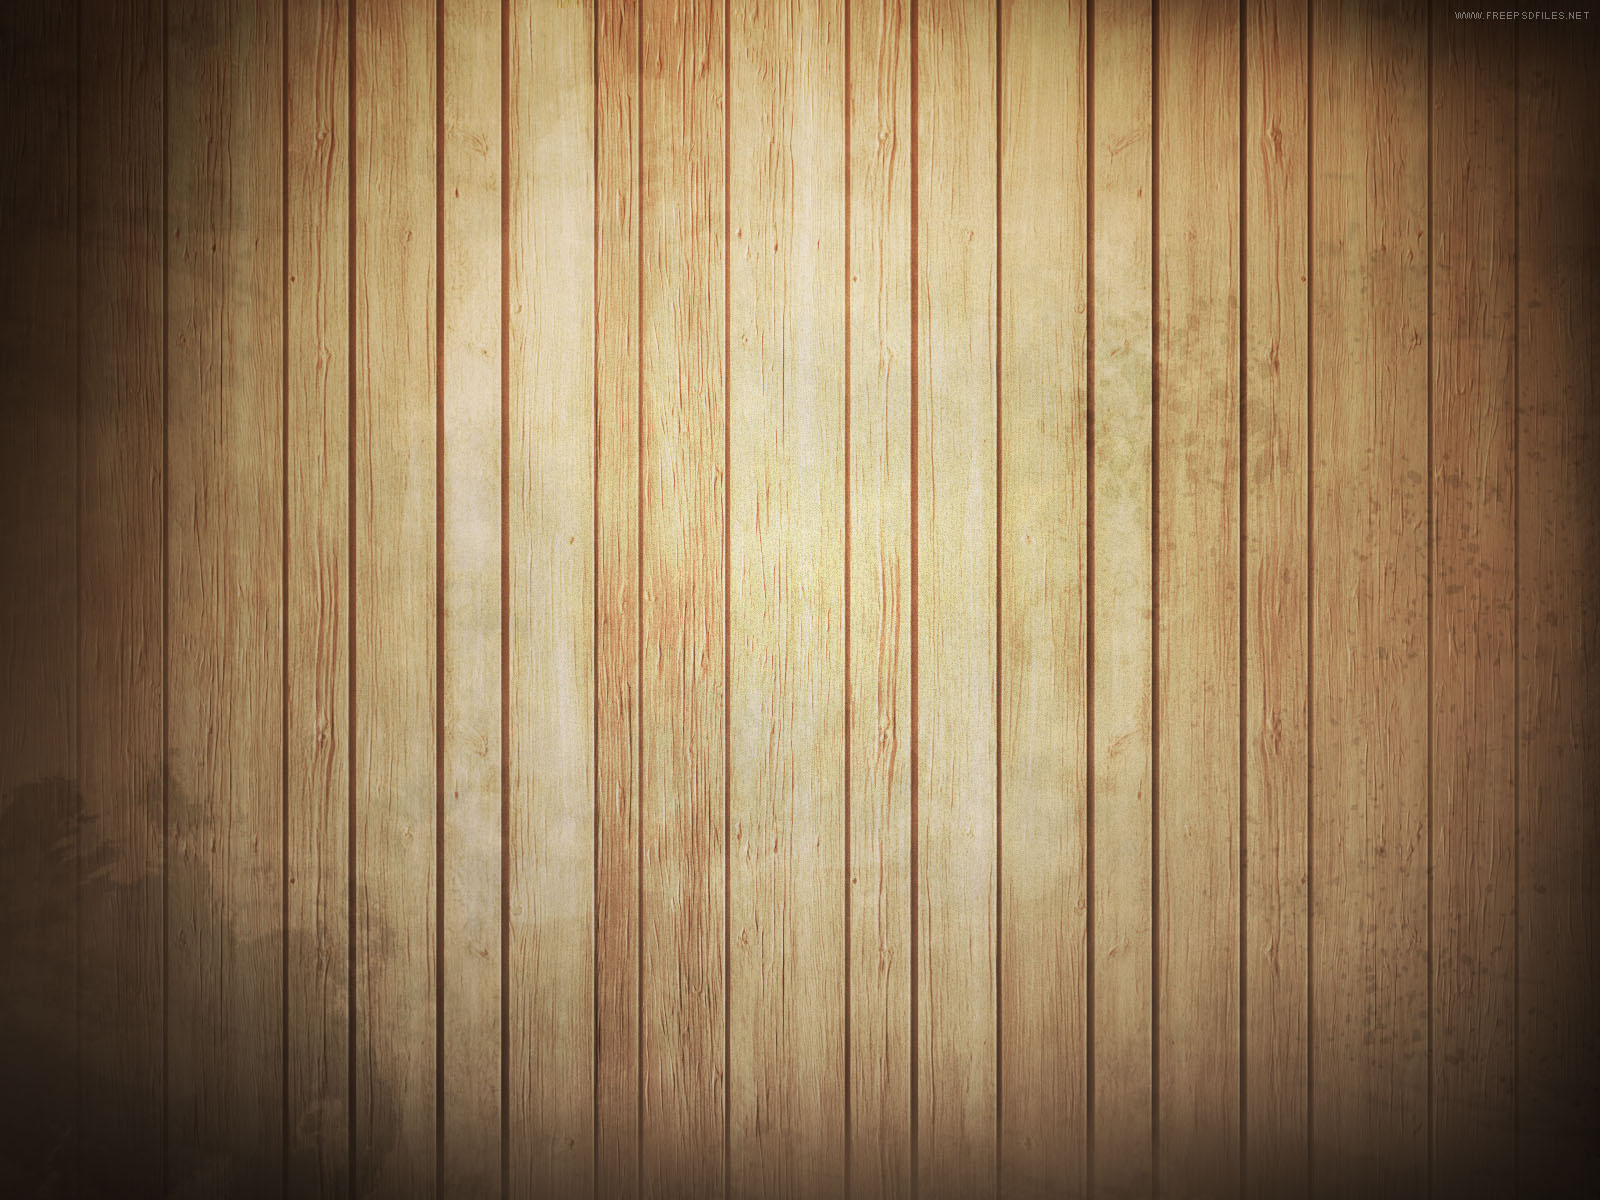 Home other hd wallpapers wood hd background Cuzimage